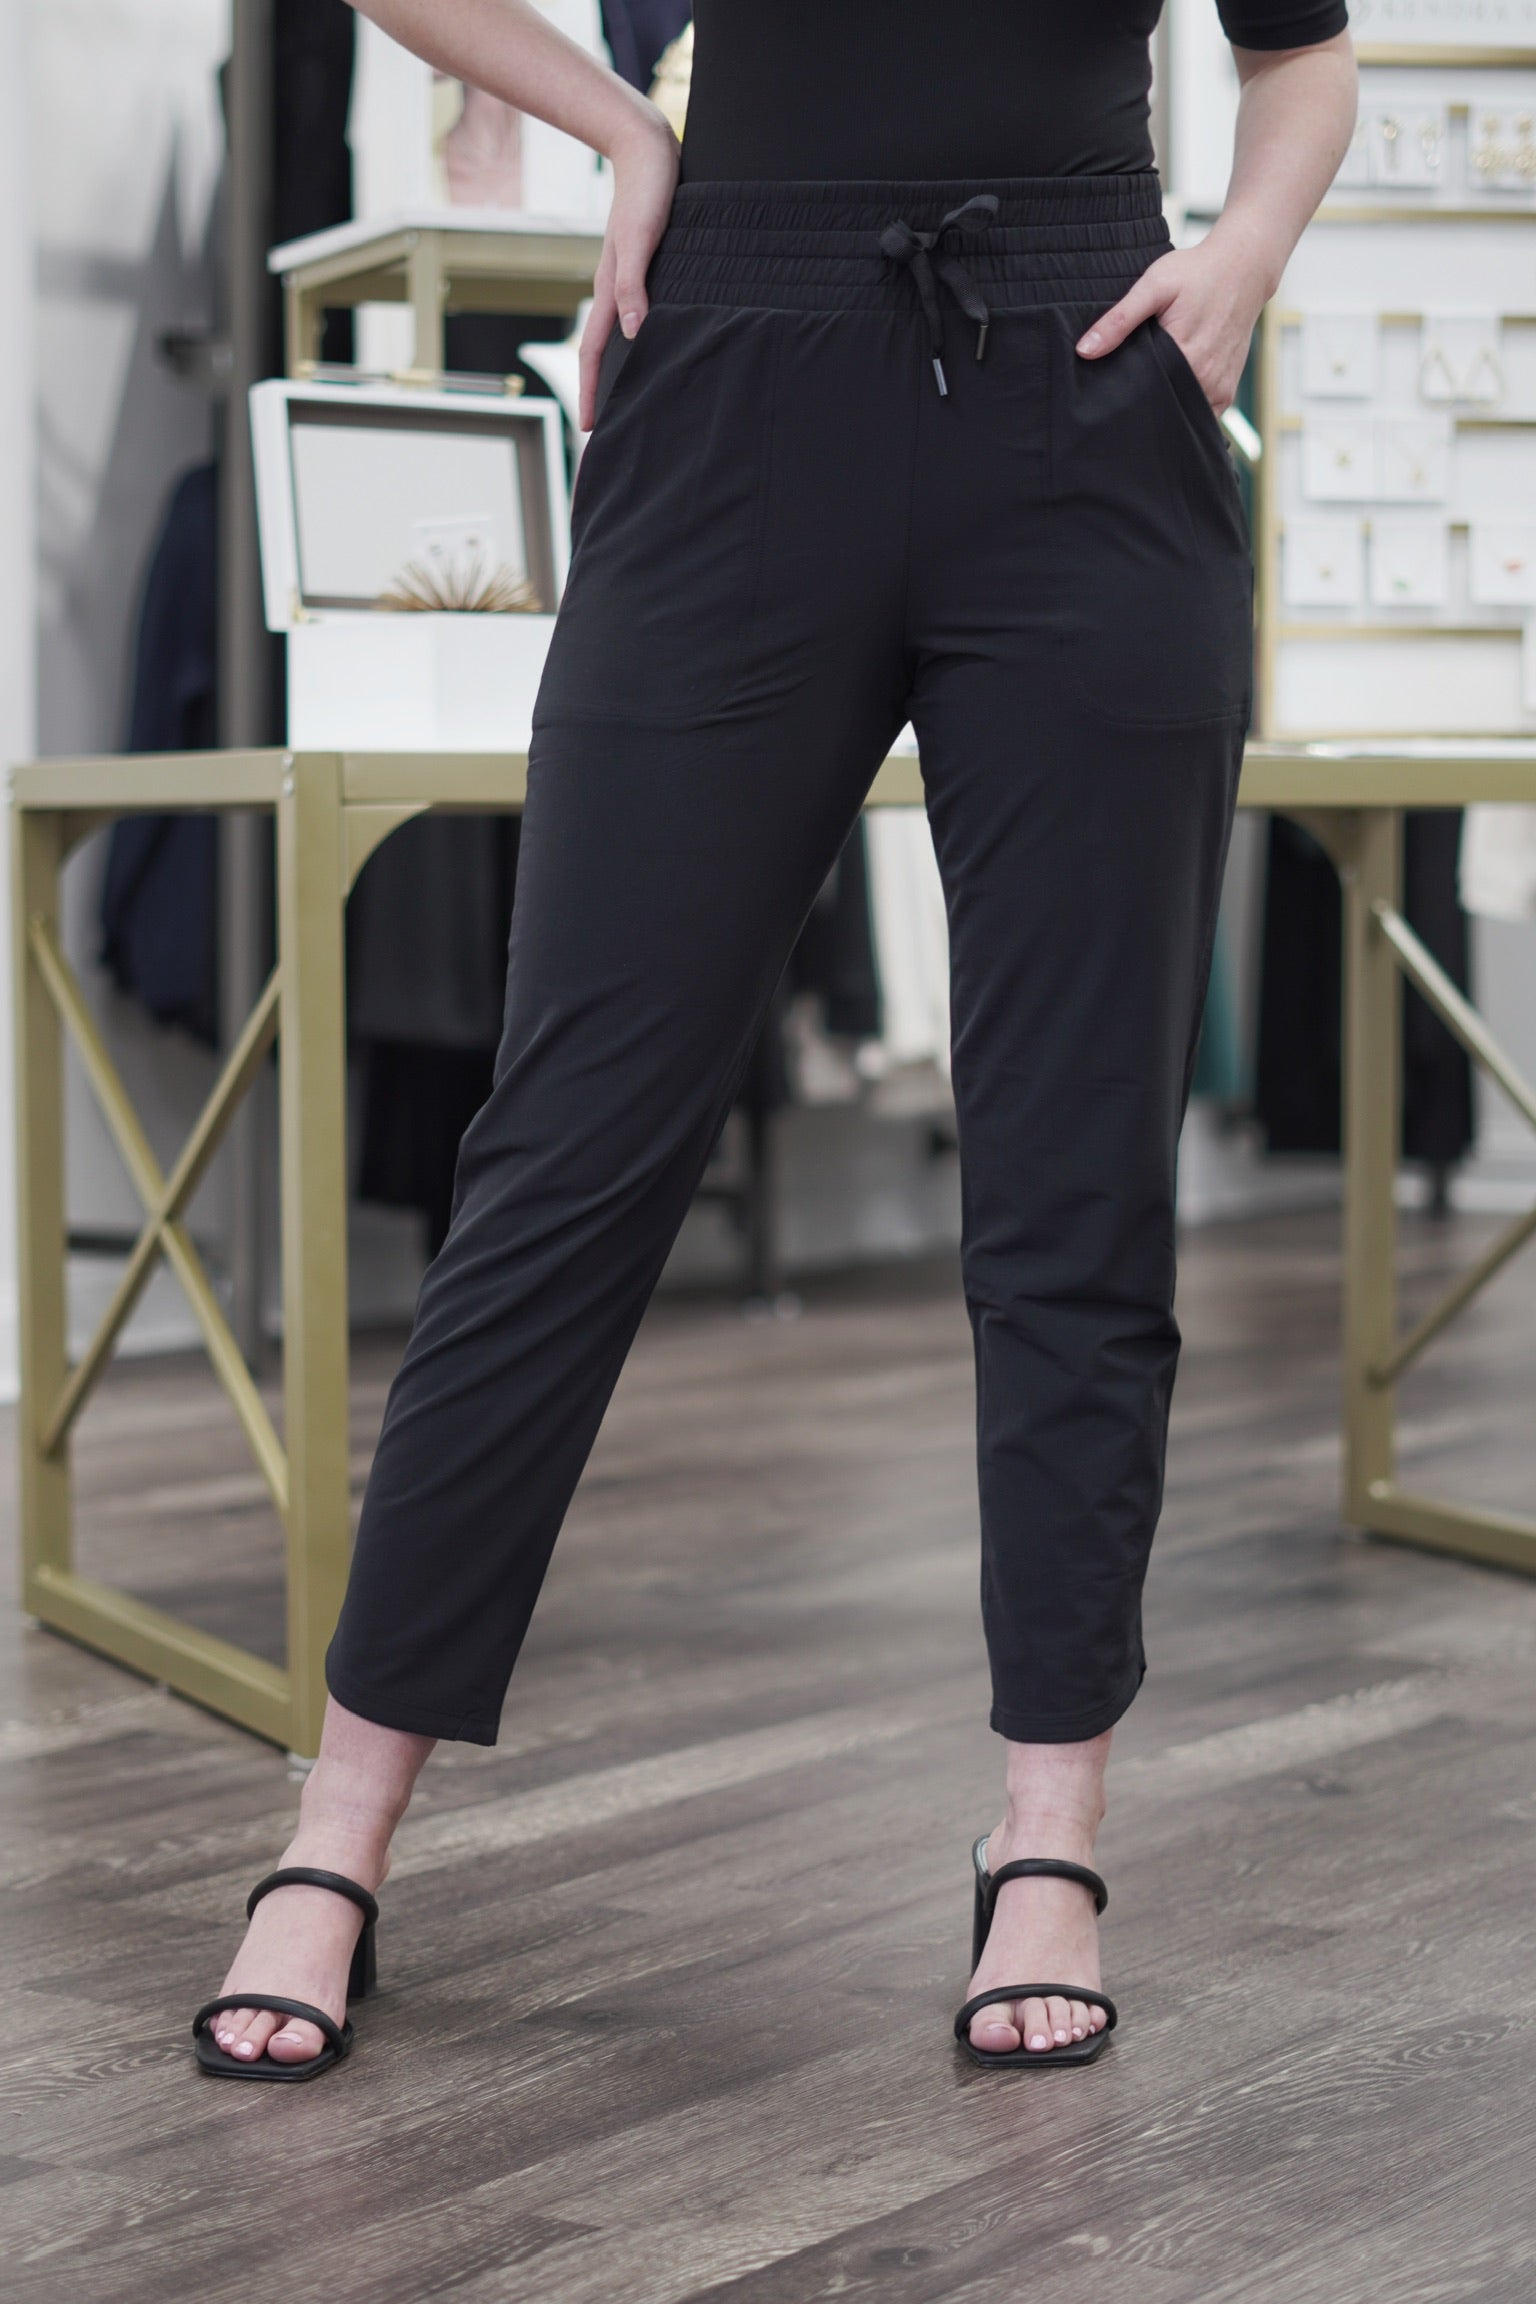 SPANX, Pants & Jumpsuits, Spanx The Perfect Pant Slim Straight